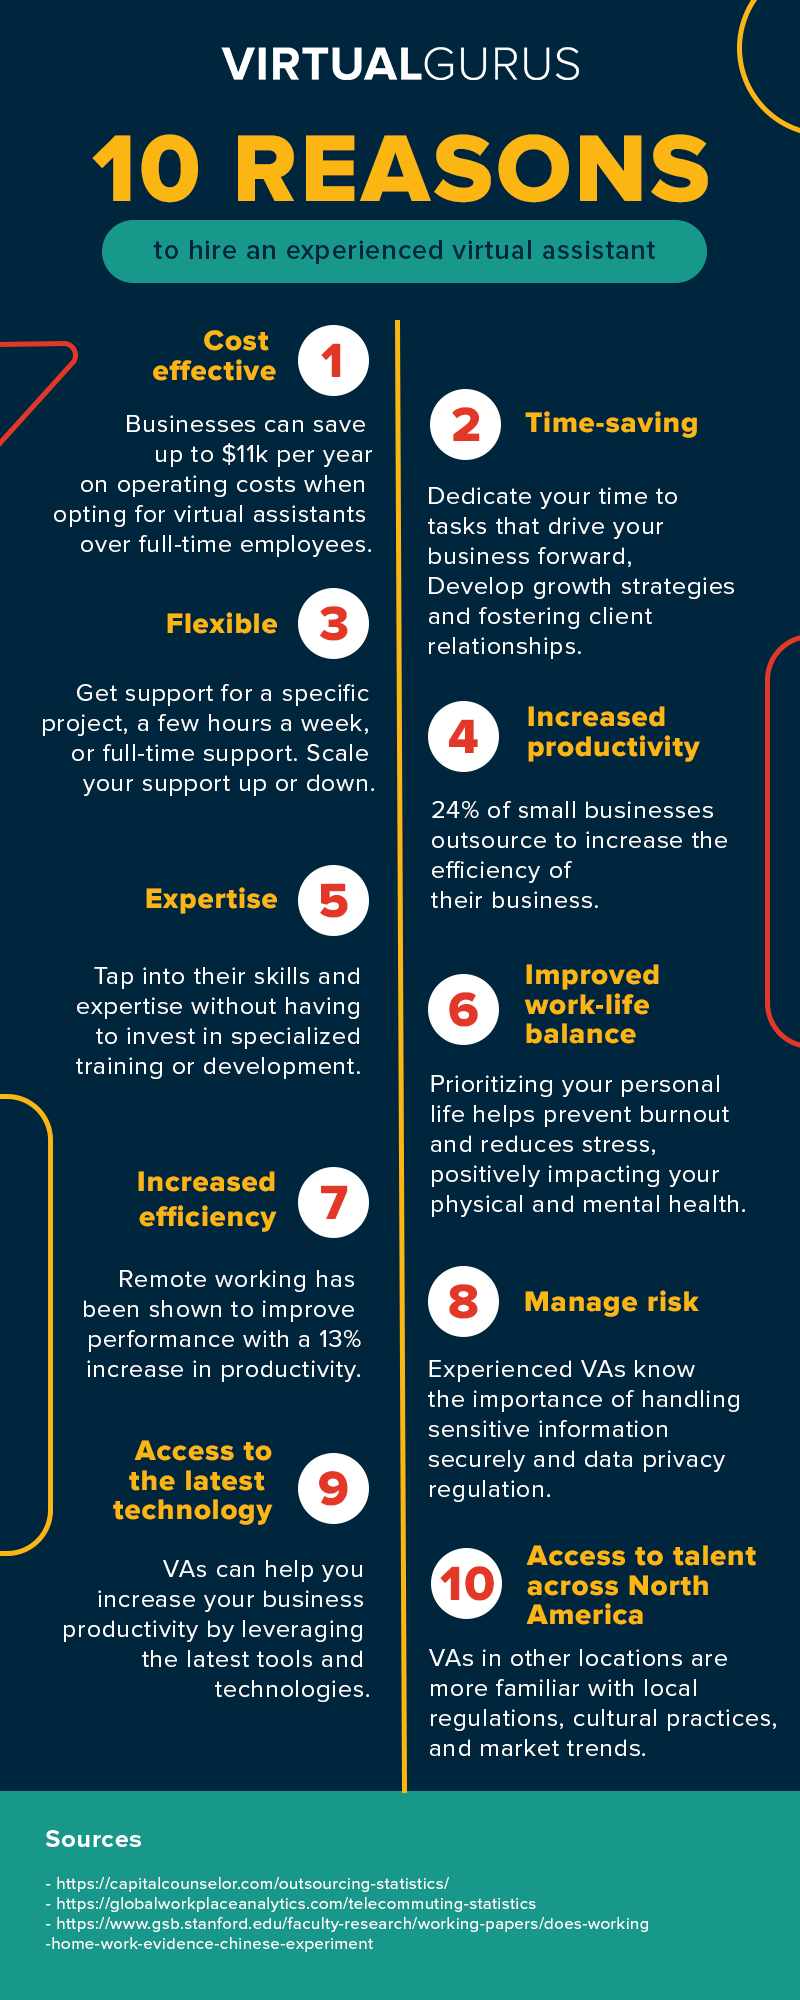 An infographic with the Ten Reasons to hire an experienced virtual assistant. 1. Cost-Effective 2. Time-Saving 3. Flexible 4. Increased Productivity 5. Expertise 6. Improved Work-Life Balance 7. Increased Efficiency 8. Reduced Risk 9. Access to the Latest Tools and Technologies 10. Access to North American Talent